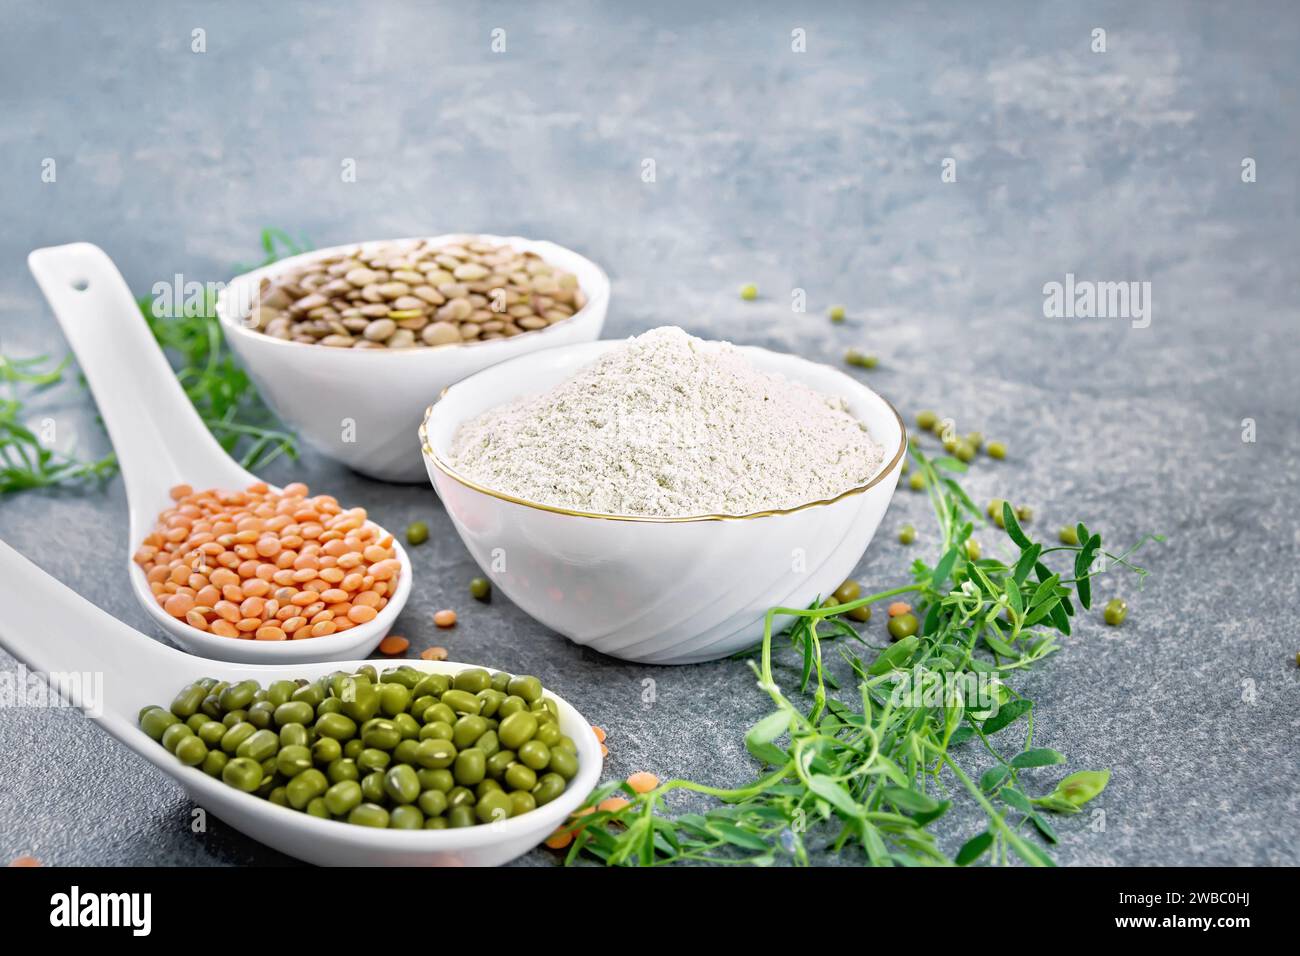 Lentil flour in bowl, red, green lentils in spoons, brown in bowl, bean stalks with leaves on stone background Stock Photo